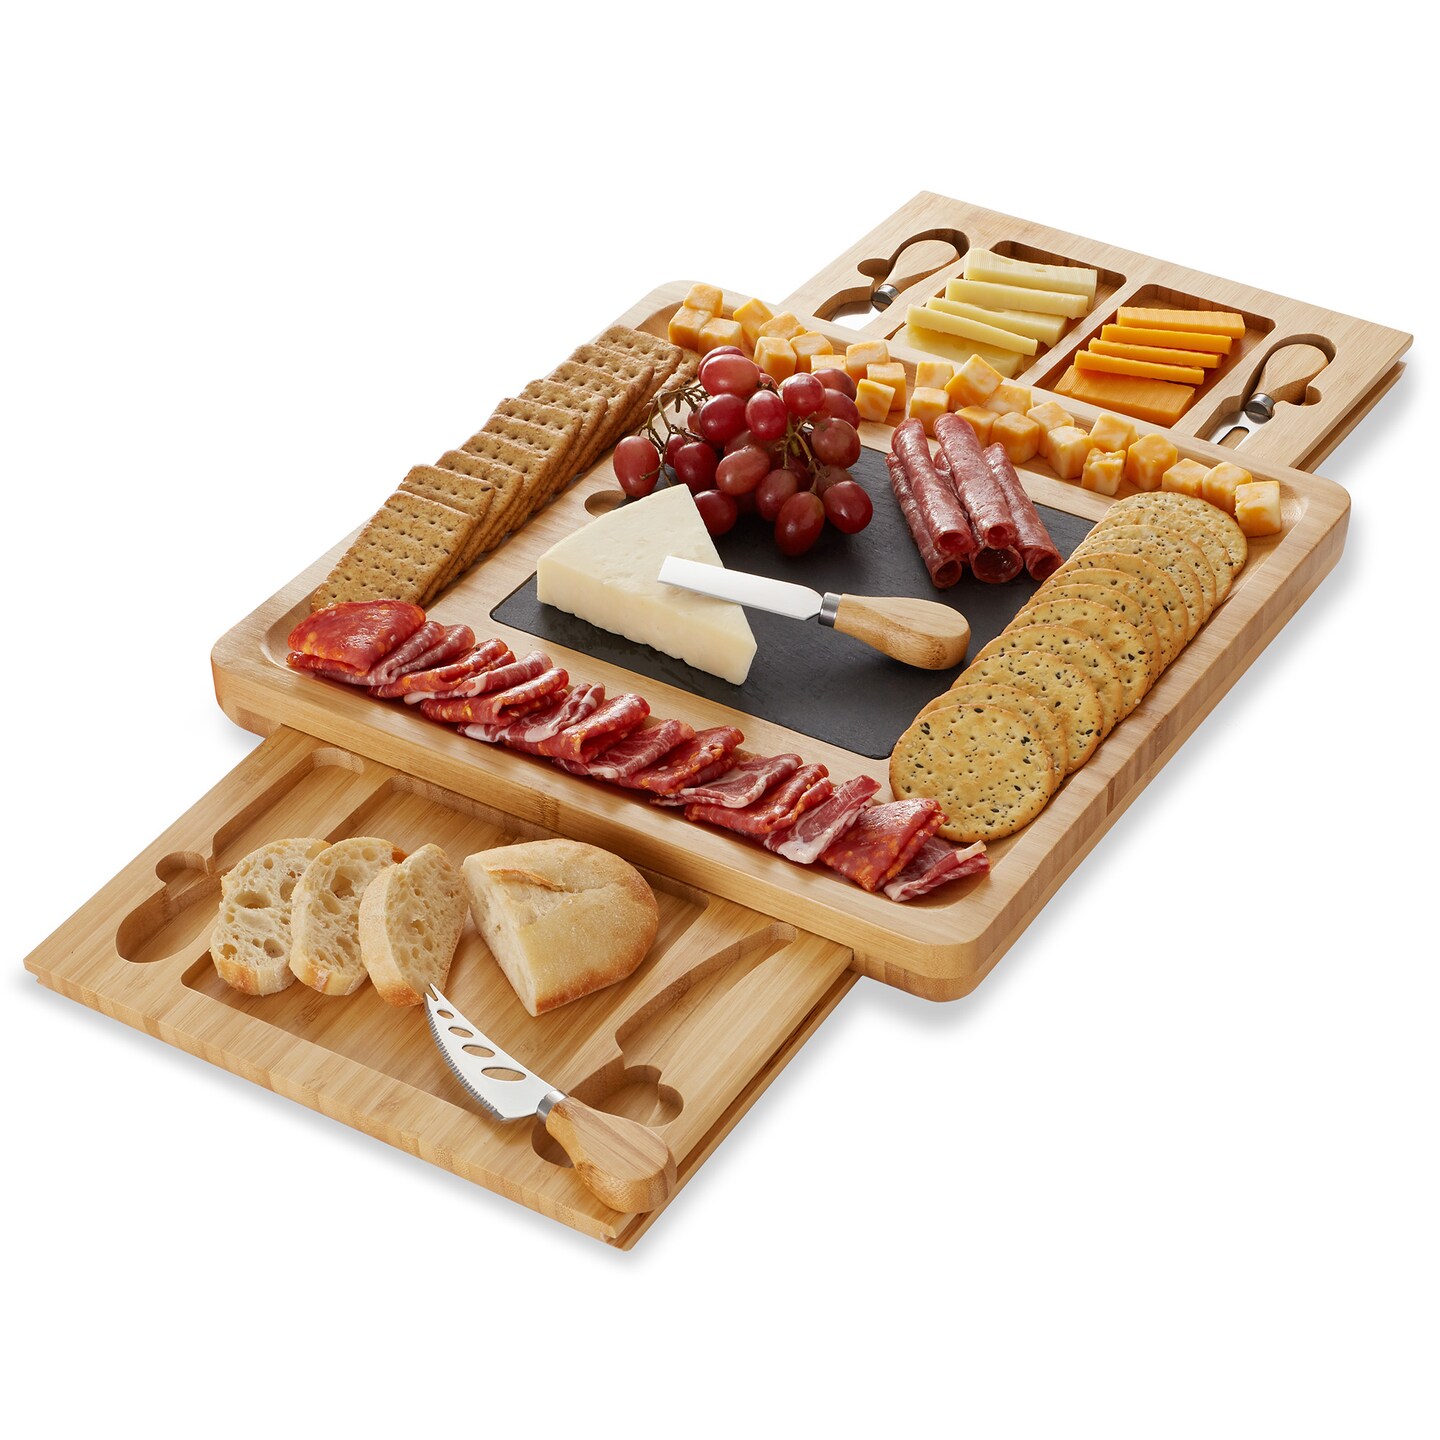 Casafield Charcuterie Board, Large Bamboo Cheese Board and Knife Gift Set - Gift for Women, House Warming, New Home, Wedding - Wooden Serving Tray with Slate Cheese Plate and Slide-Out Drawers